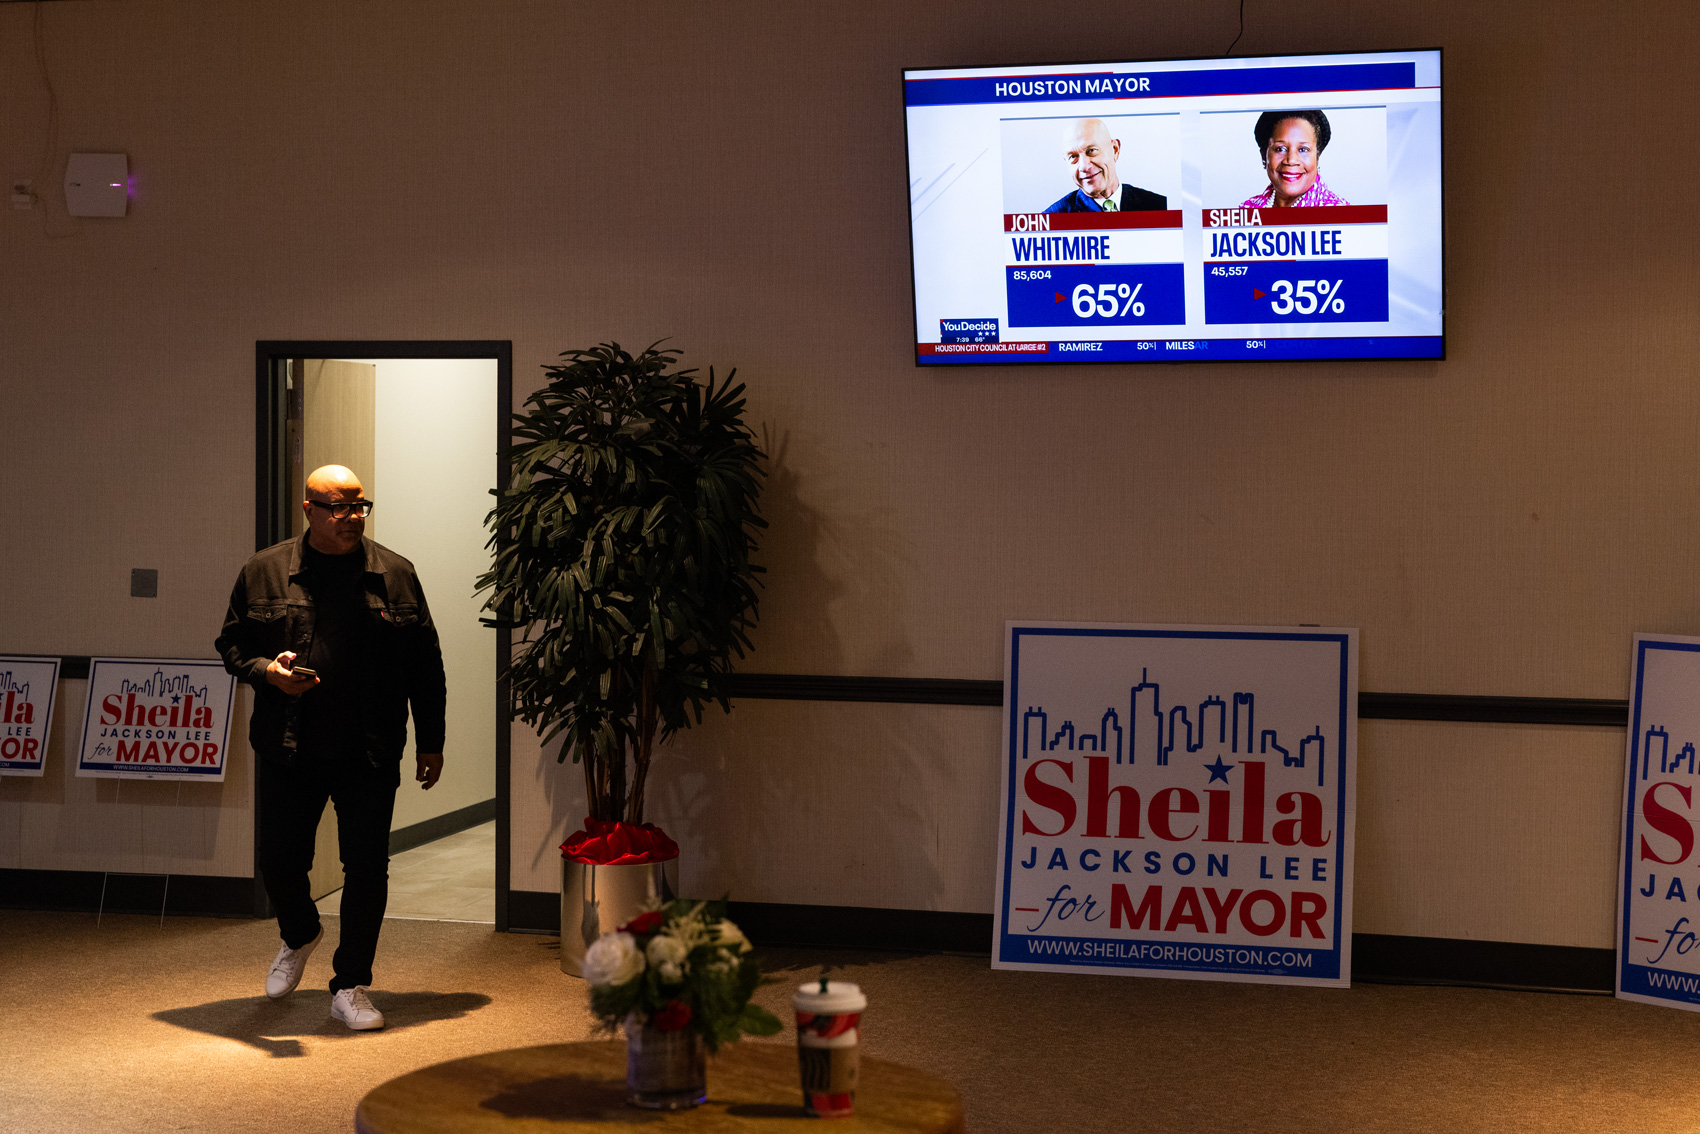 A man walks past a television giving early voter results of the runoff election between state Sen. John Whitmire and U.S. Rep. Sheila Jackson Lee during a watch party at the Ensemble Theatre